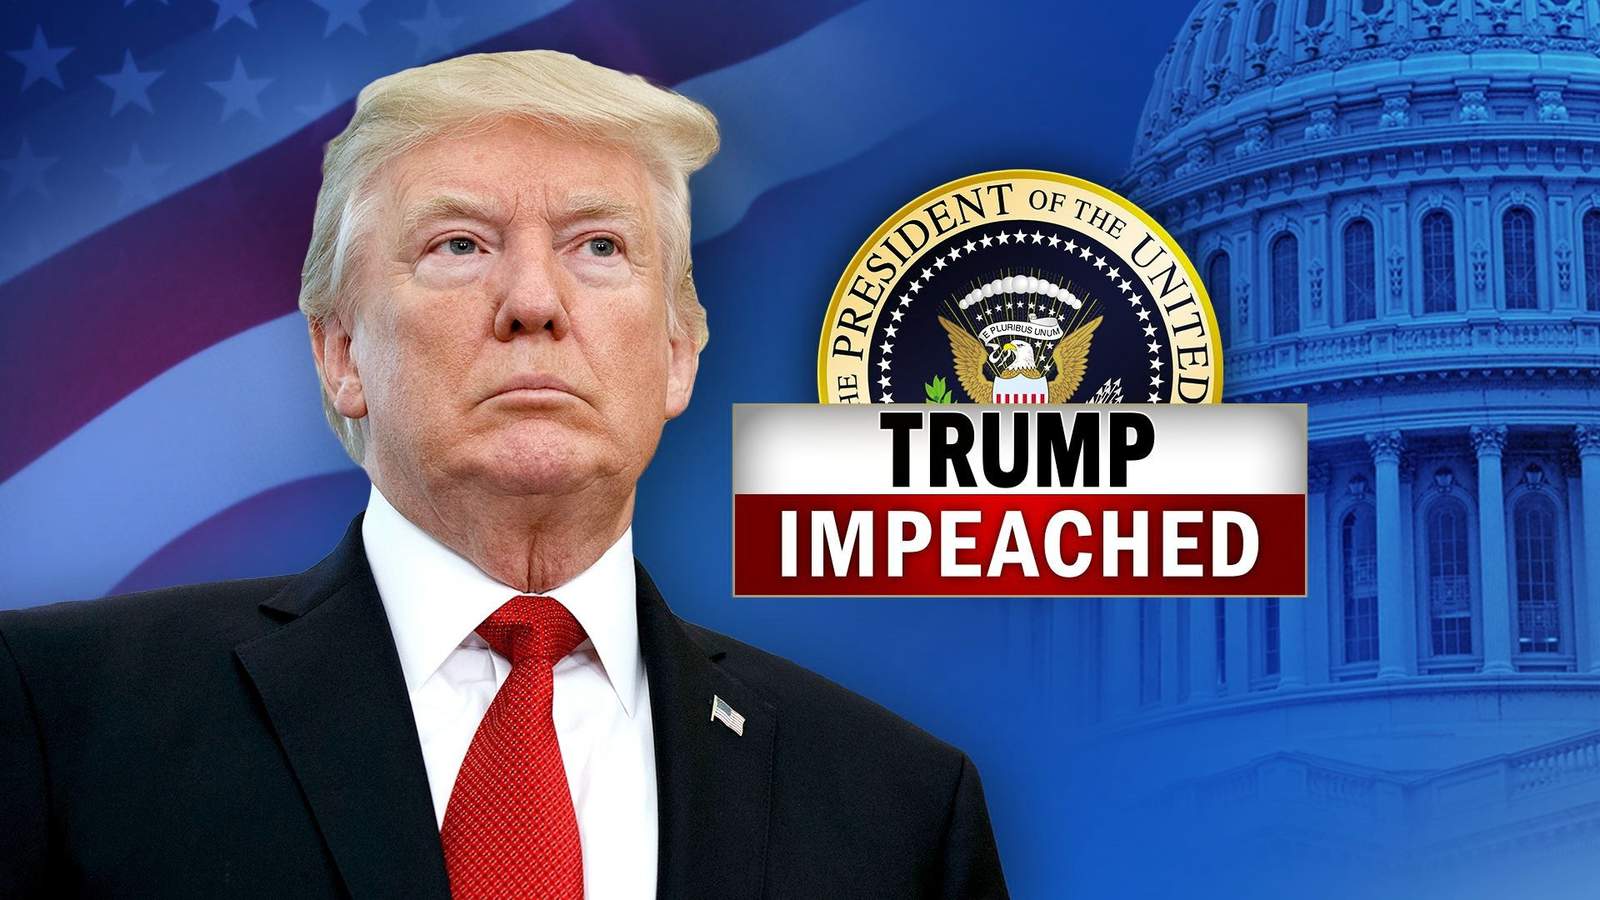 Donald Trump becomes third president to be impeached in US history